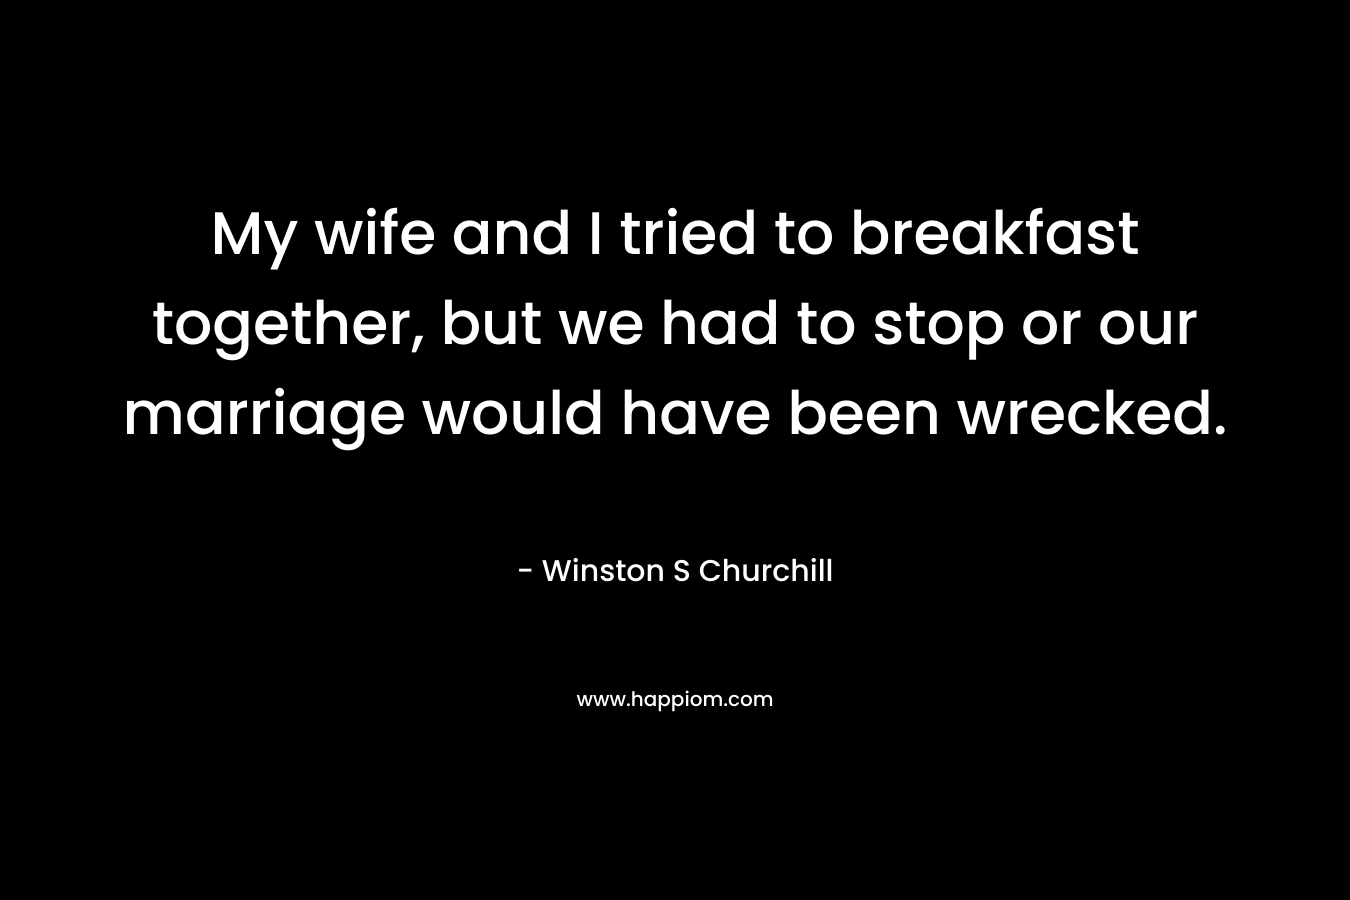 My wife and I tried to breakfast together, but we had to stop or our marriage would have been wrecked.